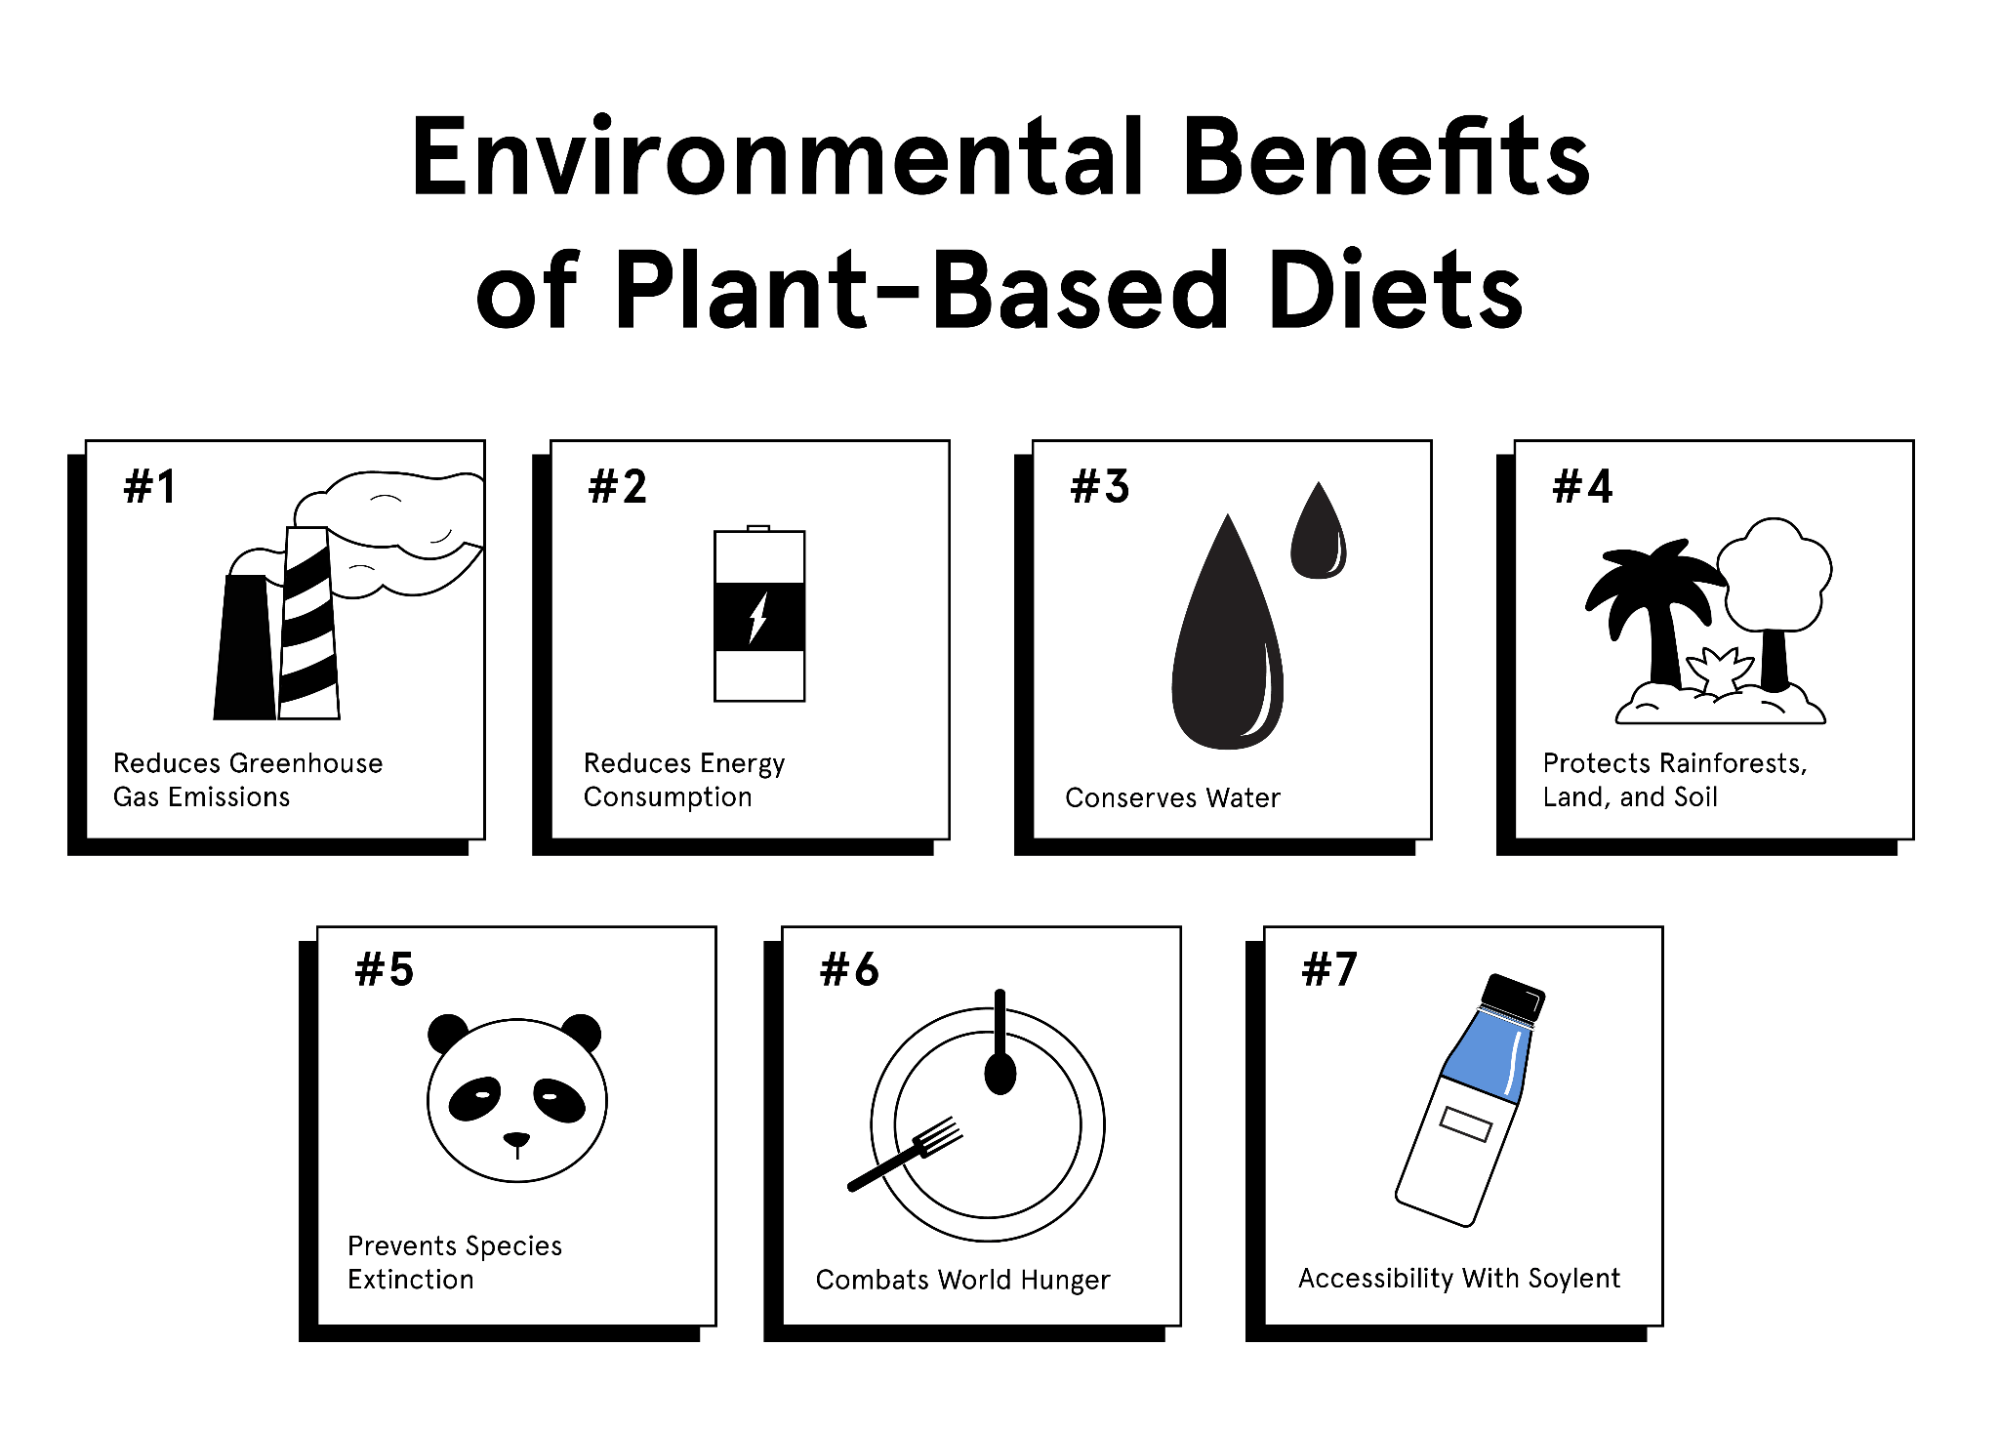 Environmental benefits of plant-based diets by Soylent